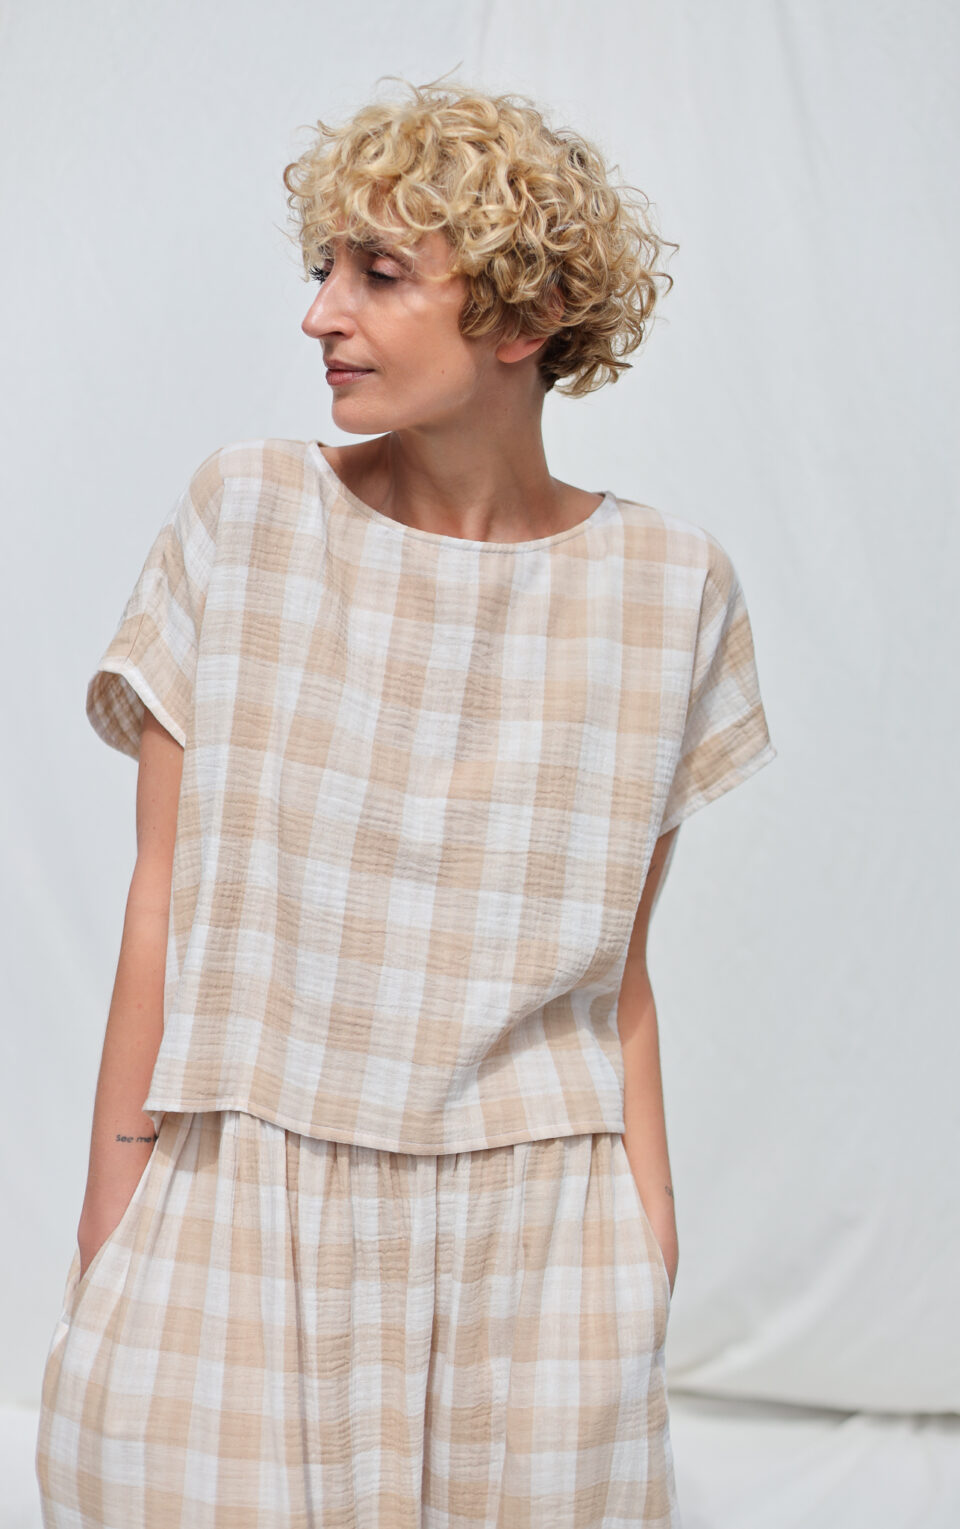 Oversized top in beige double gauze checks | Top | Sustainable clothing | OffOn clothing